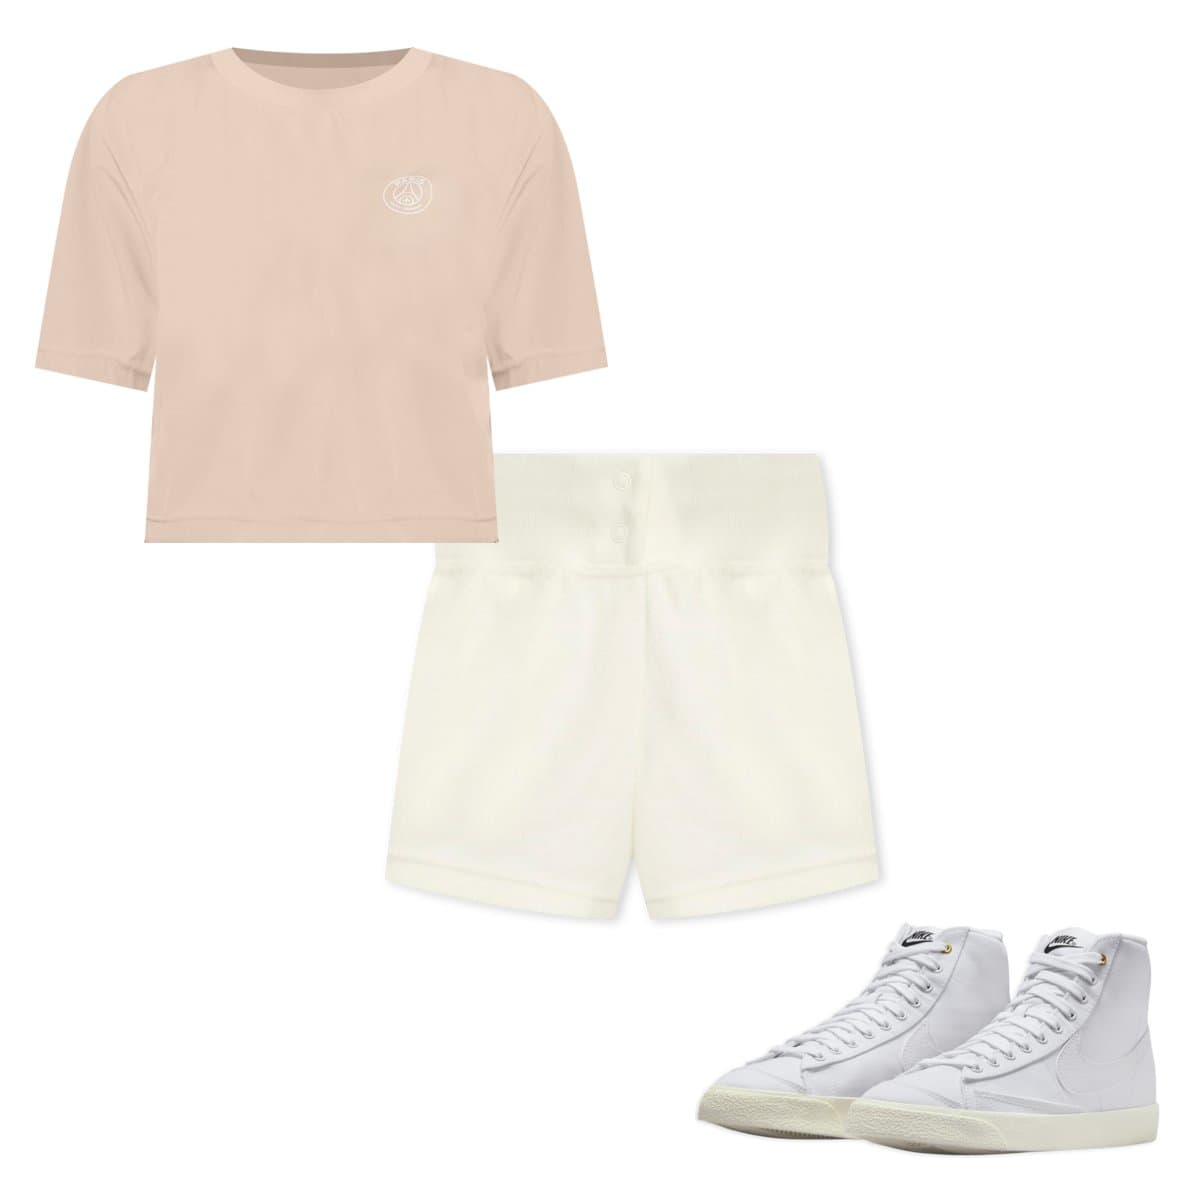 8 Cute Nike Summer Outfit Ideas. Nike AT